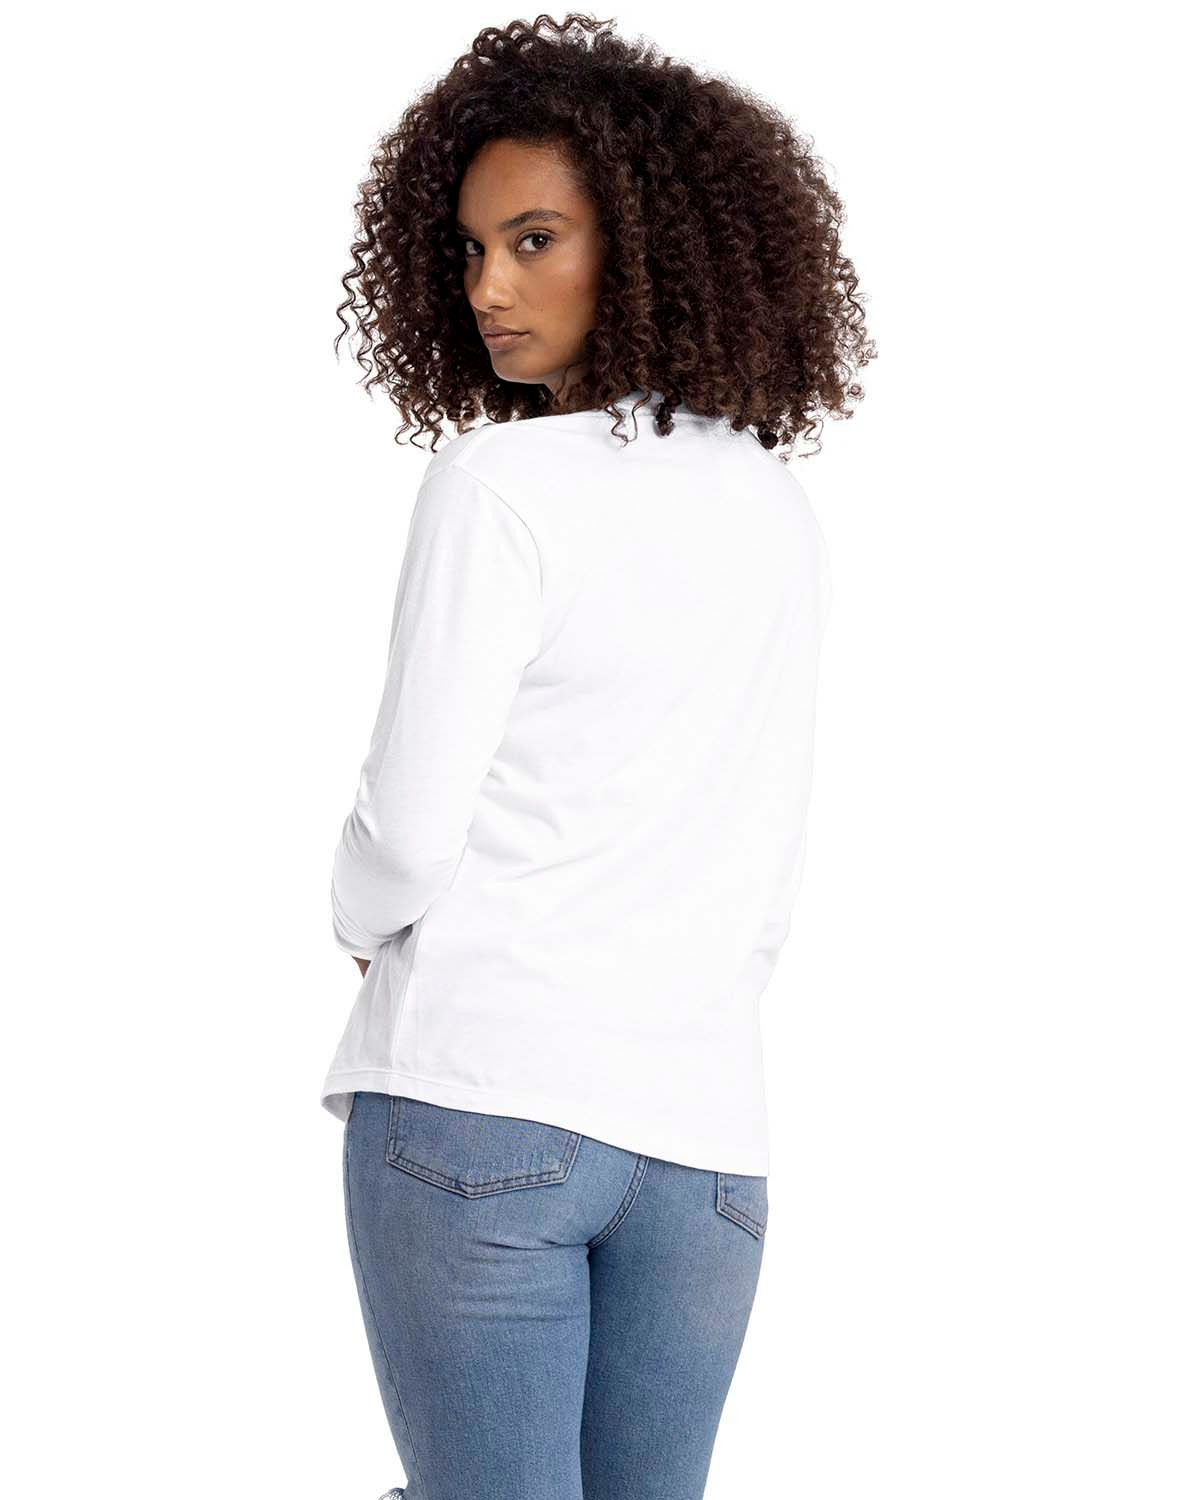 Next Level Apparel 3911NL Ladies' Relaxed Long Sleeve T-Shirt